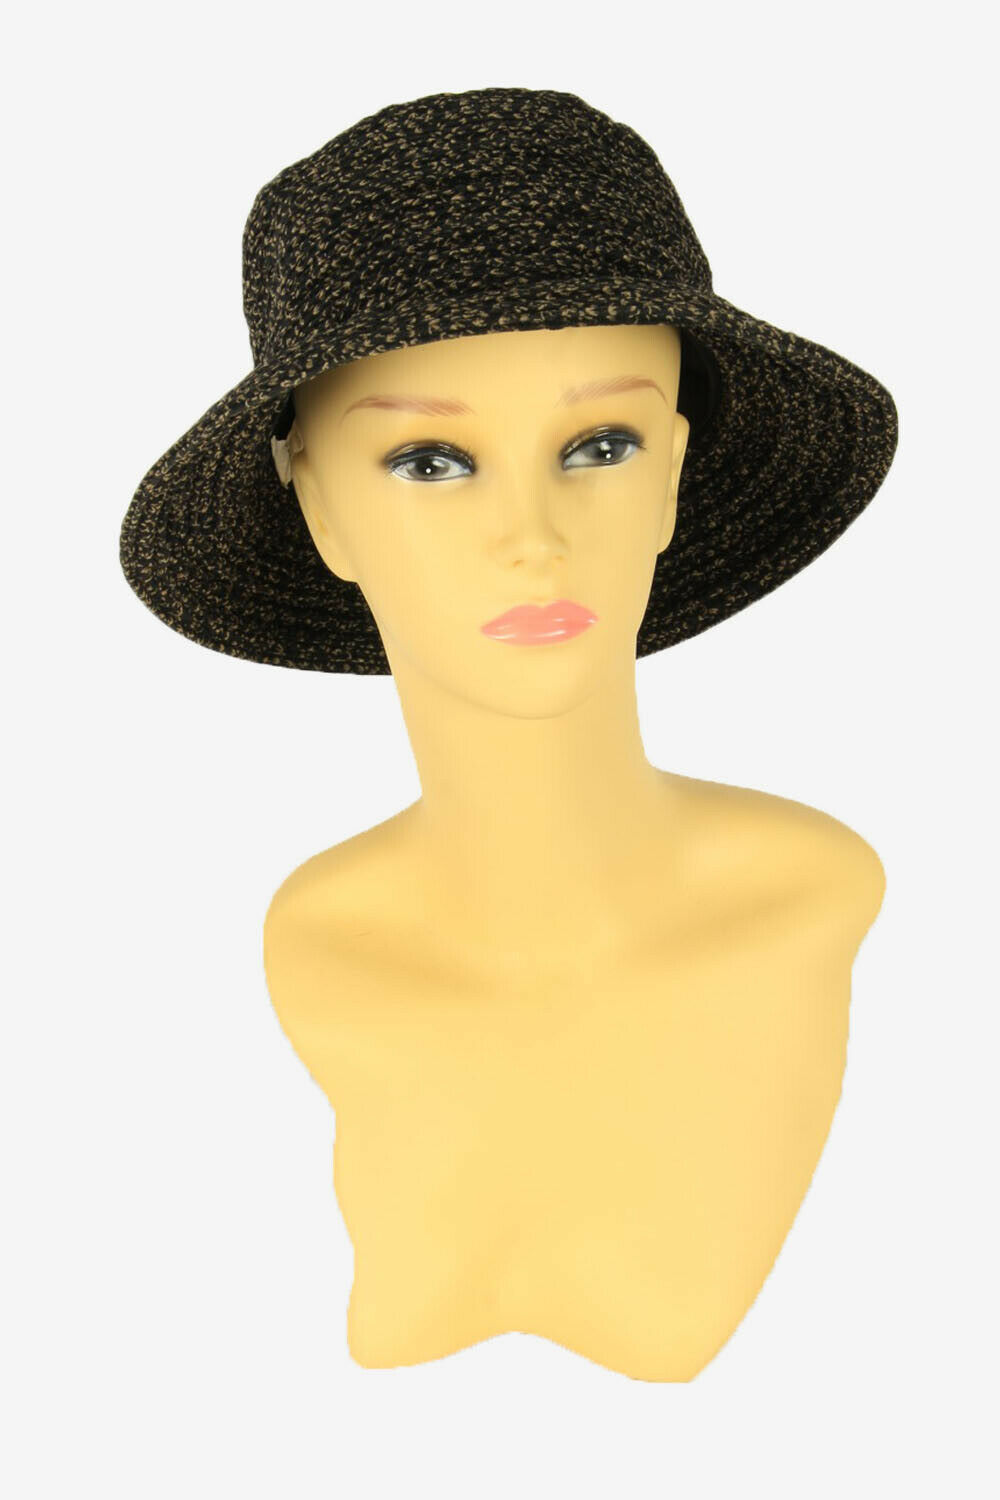 https://peppertreelondon.co.uk/wp-content/uploads/imported/5/Trilby-Vintage-Hat-Vintage-Country-Classic-90s-Retro-Multi-Size-58-cm-HAT2301-275028531665.jpg